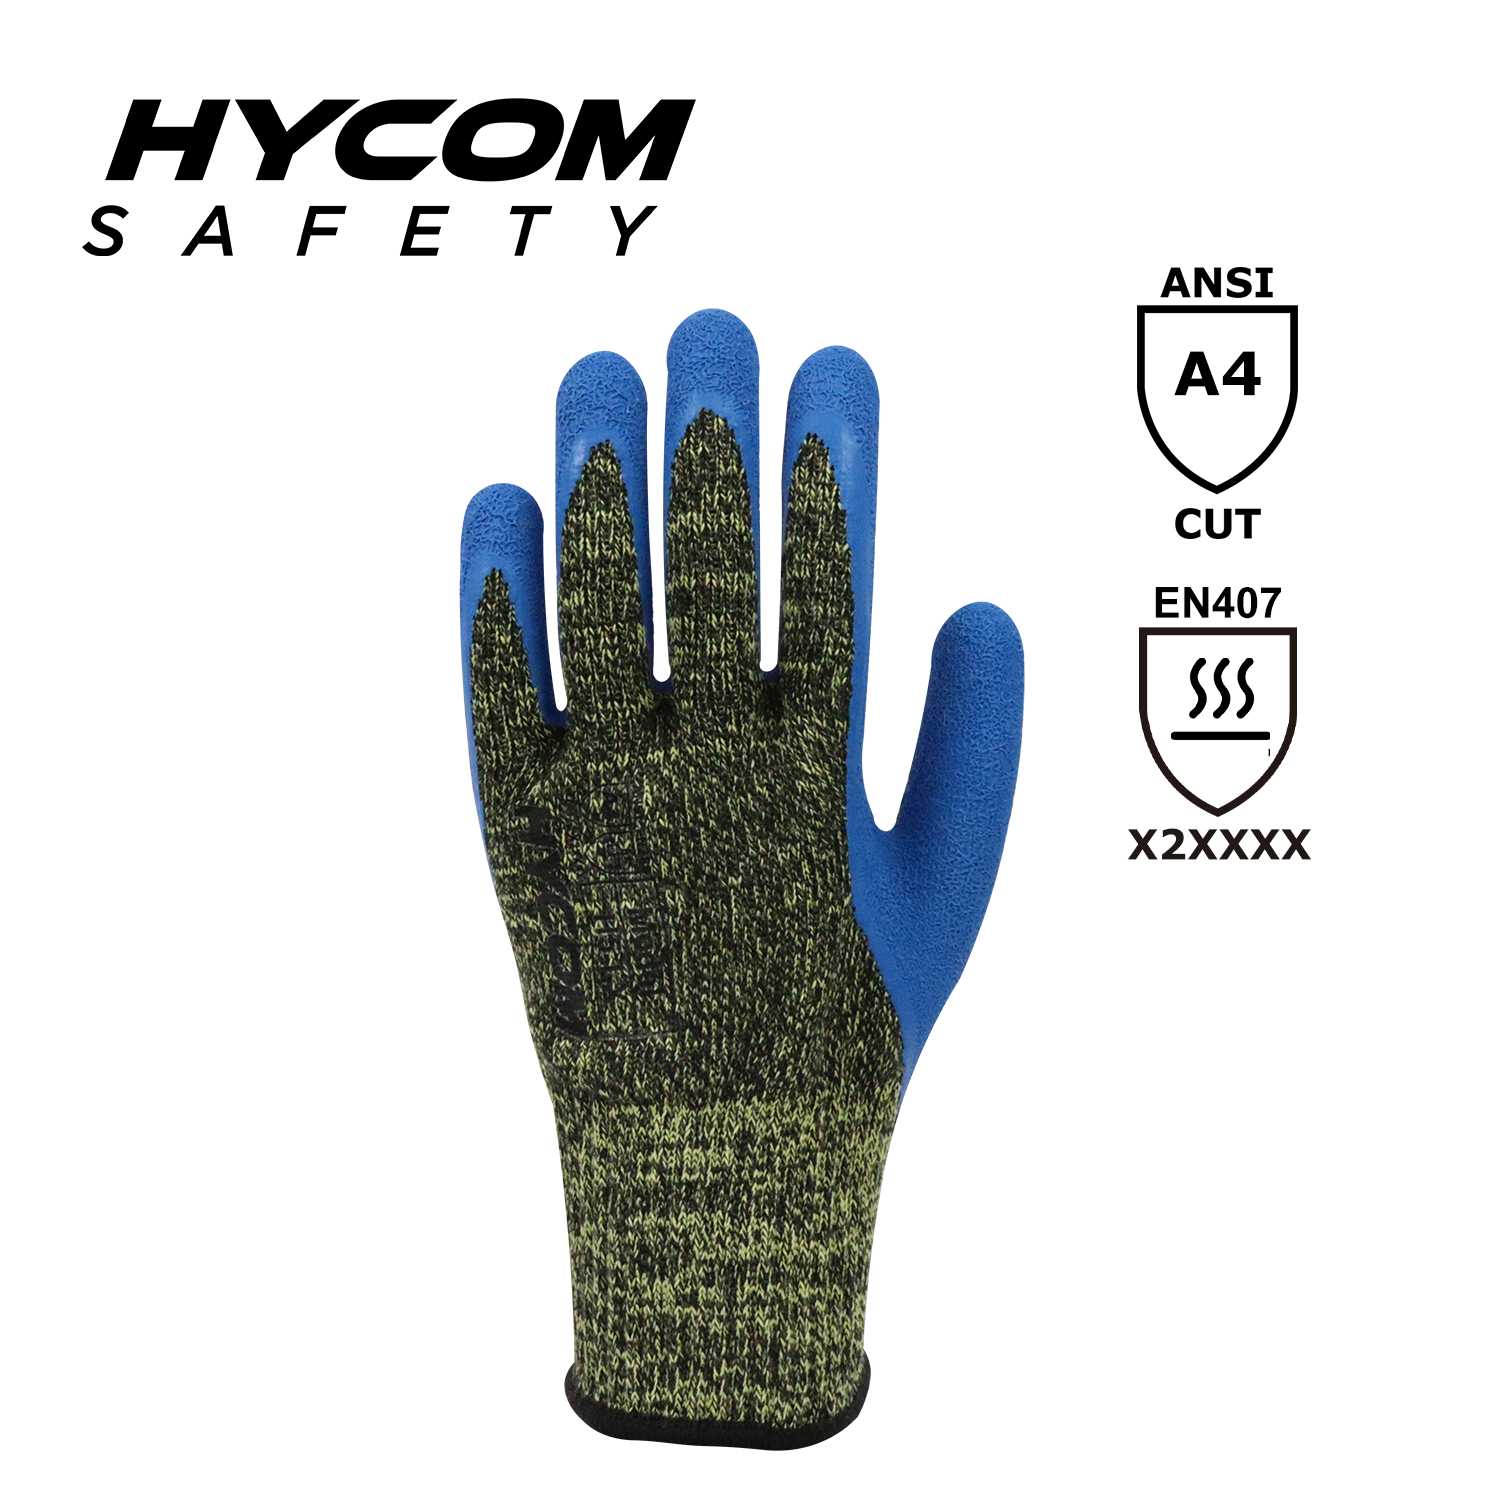 HYCOM 10G aramid contact high temperature 250°C/480F cut resistant with crinkle latex glove